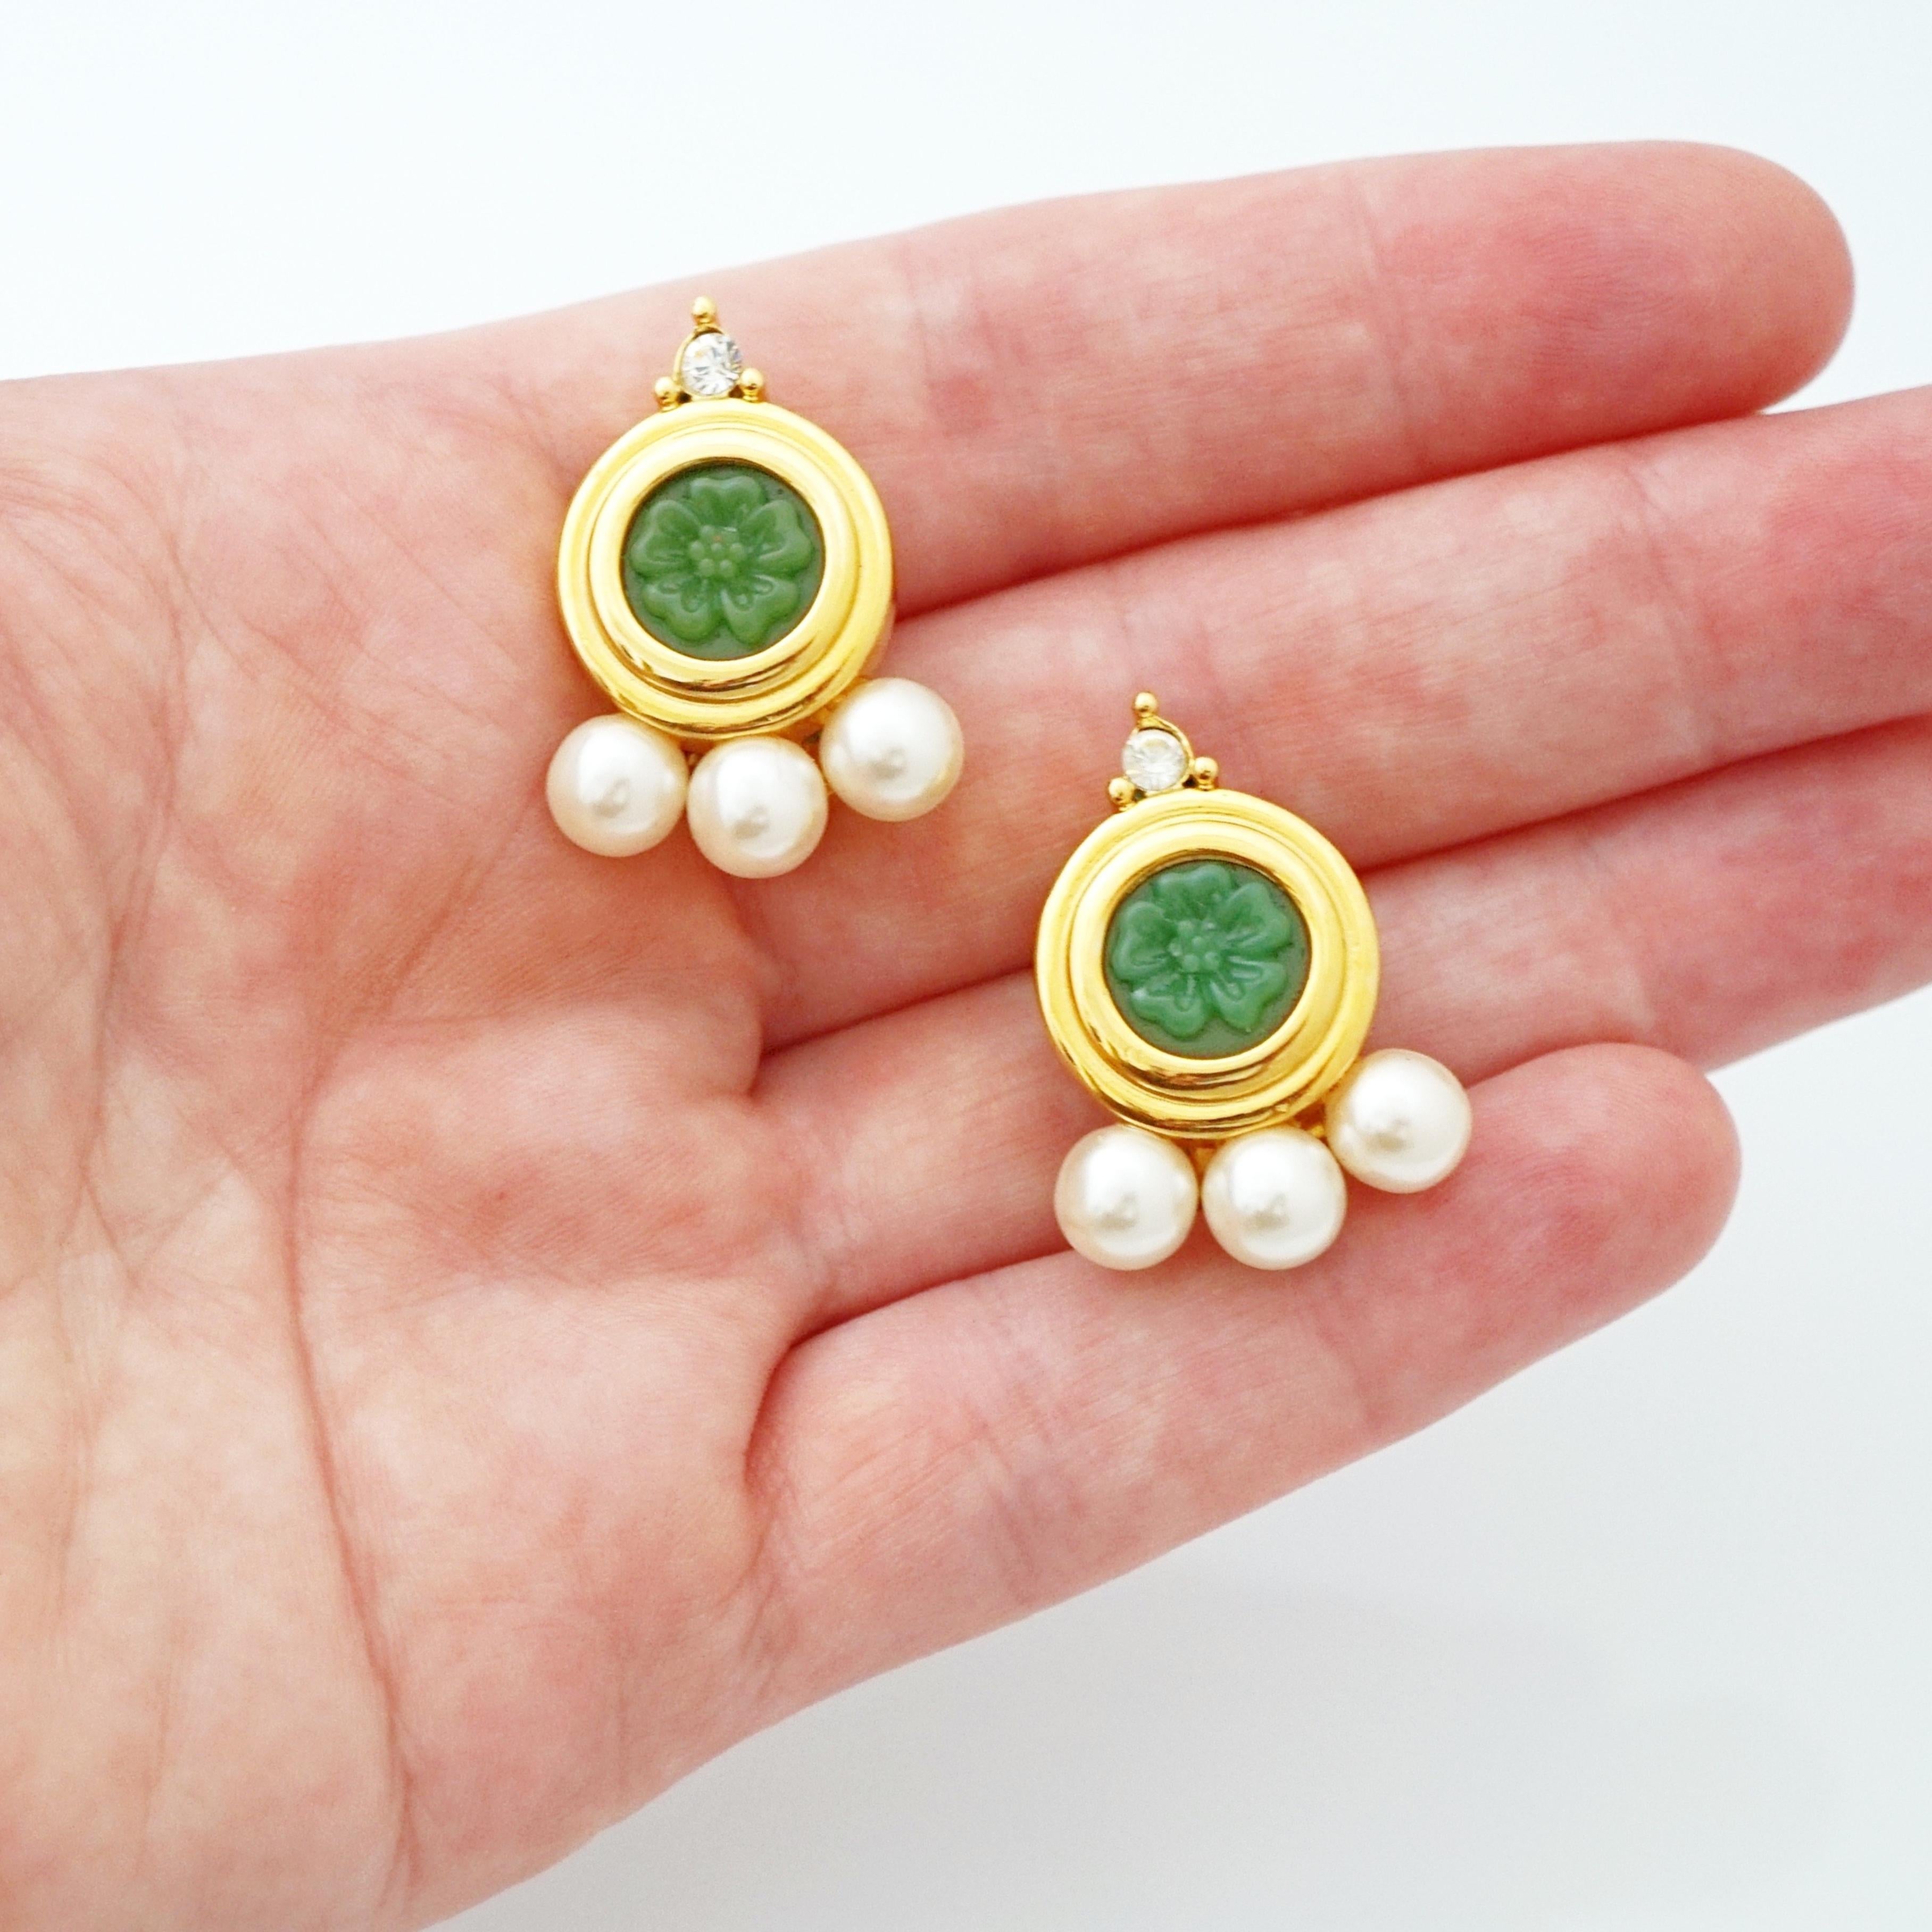 Modern Carved Faux Jade Earrings With Pearl Details By Joan Rivers, 1990s For Sale